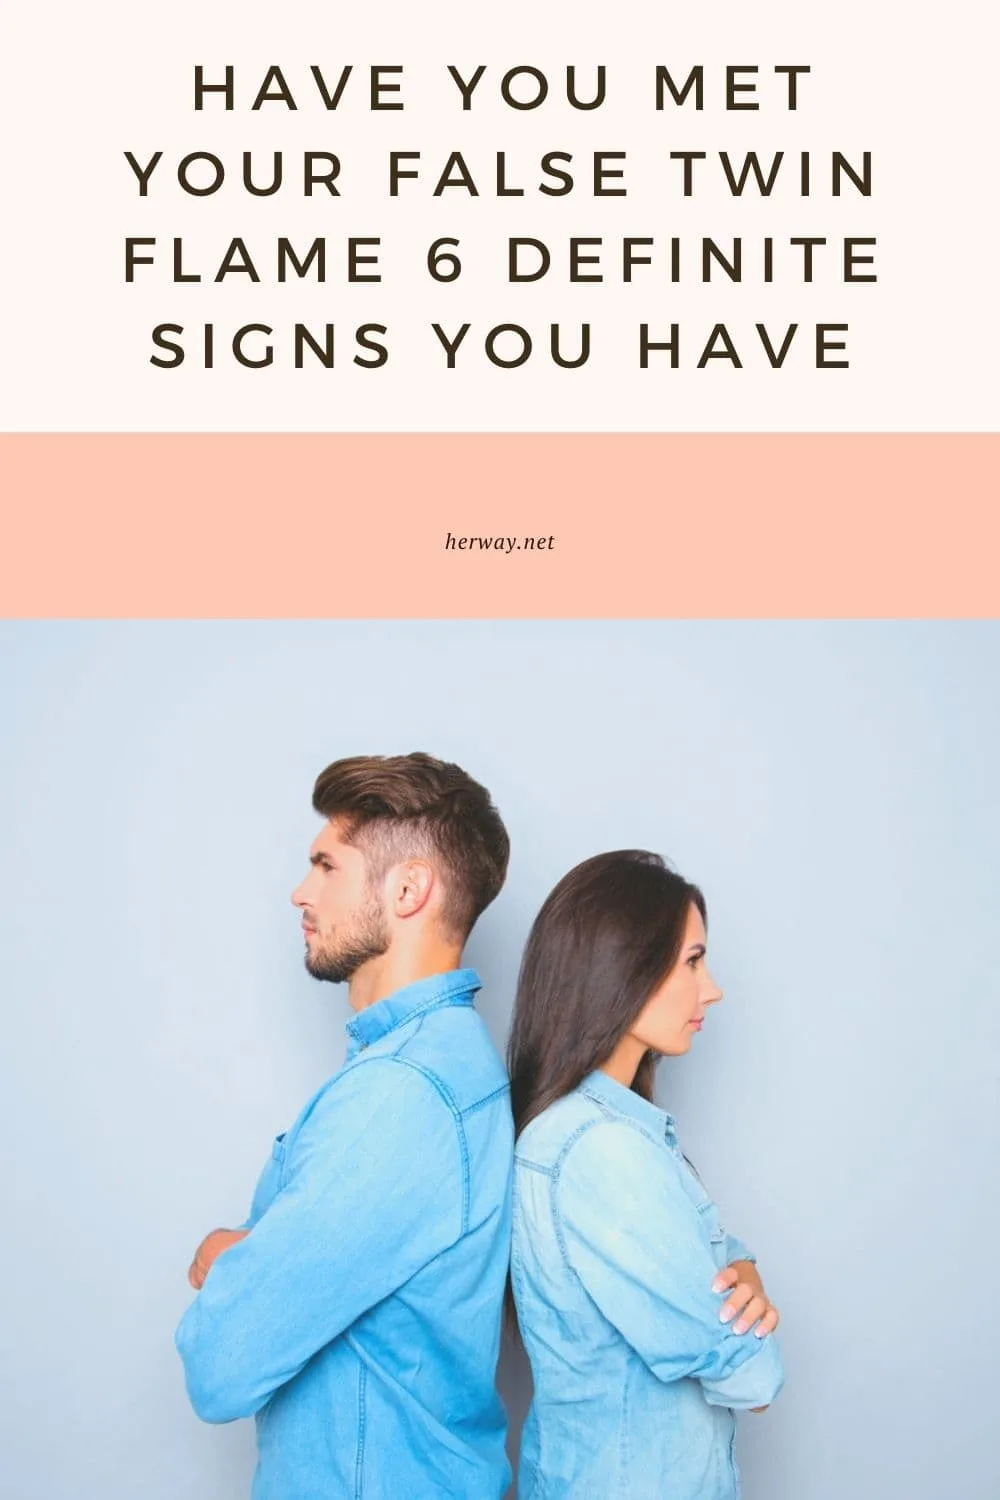 Have You Met Your False Twin Flame 6 Definite Signs You Have